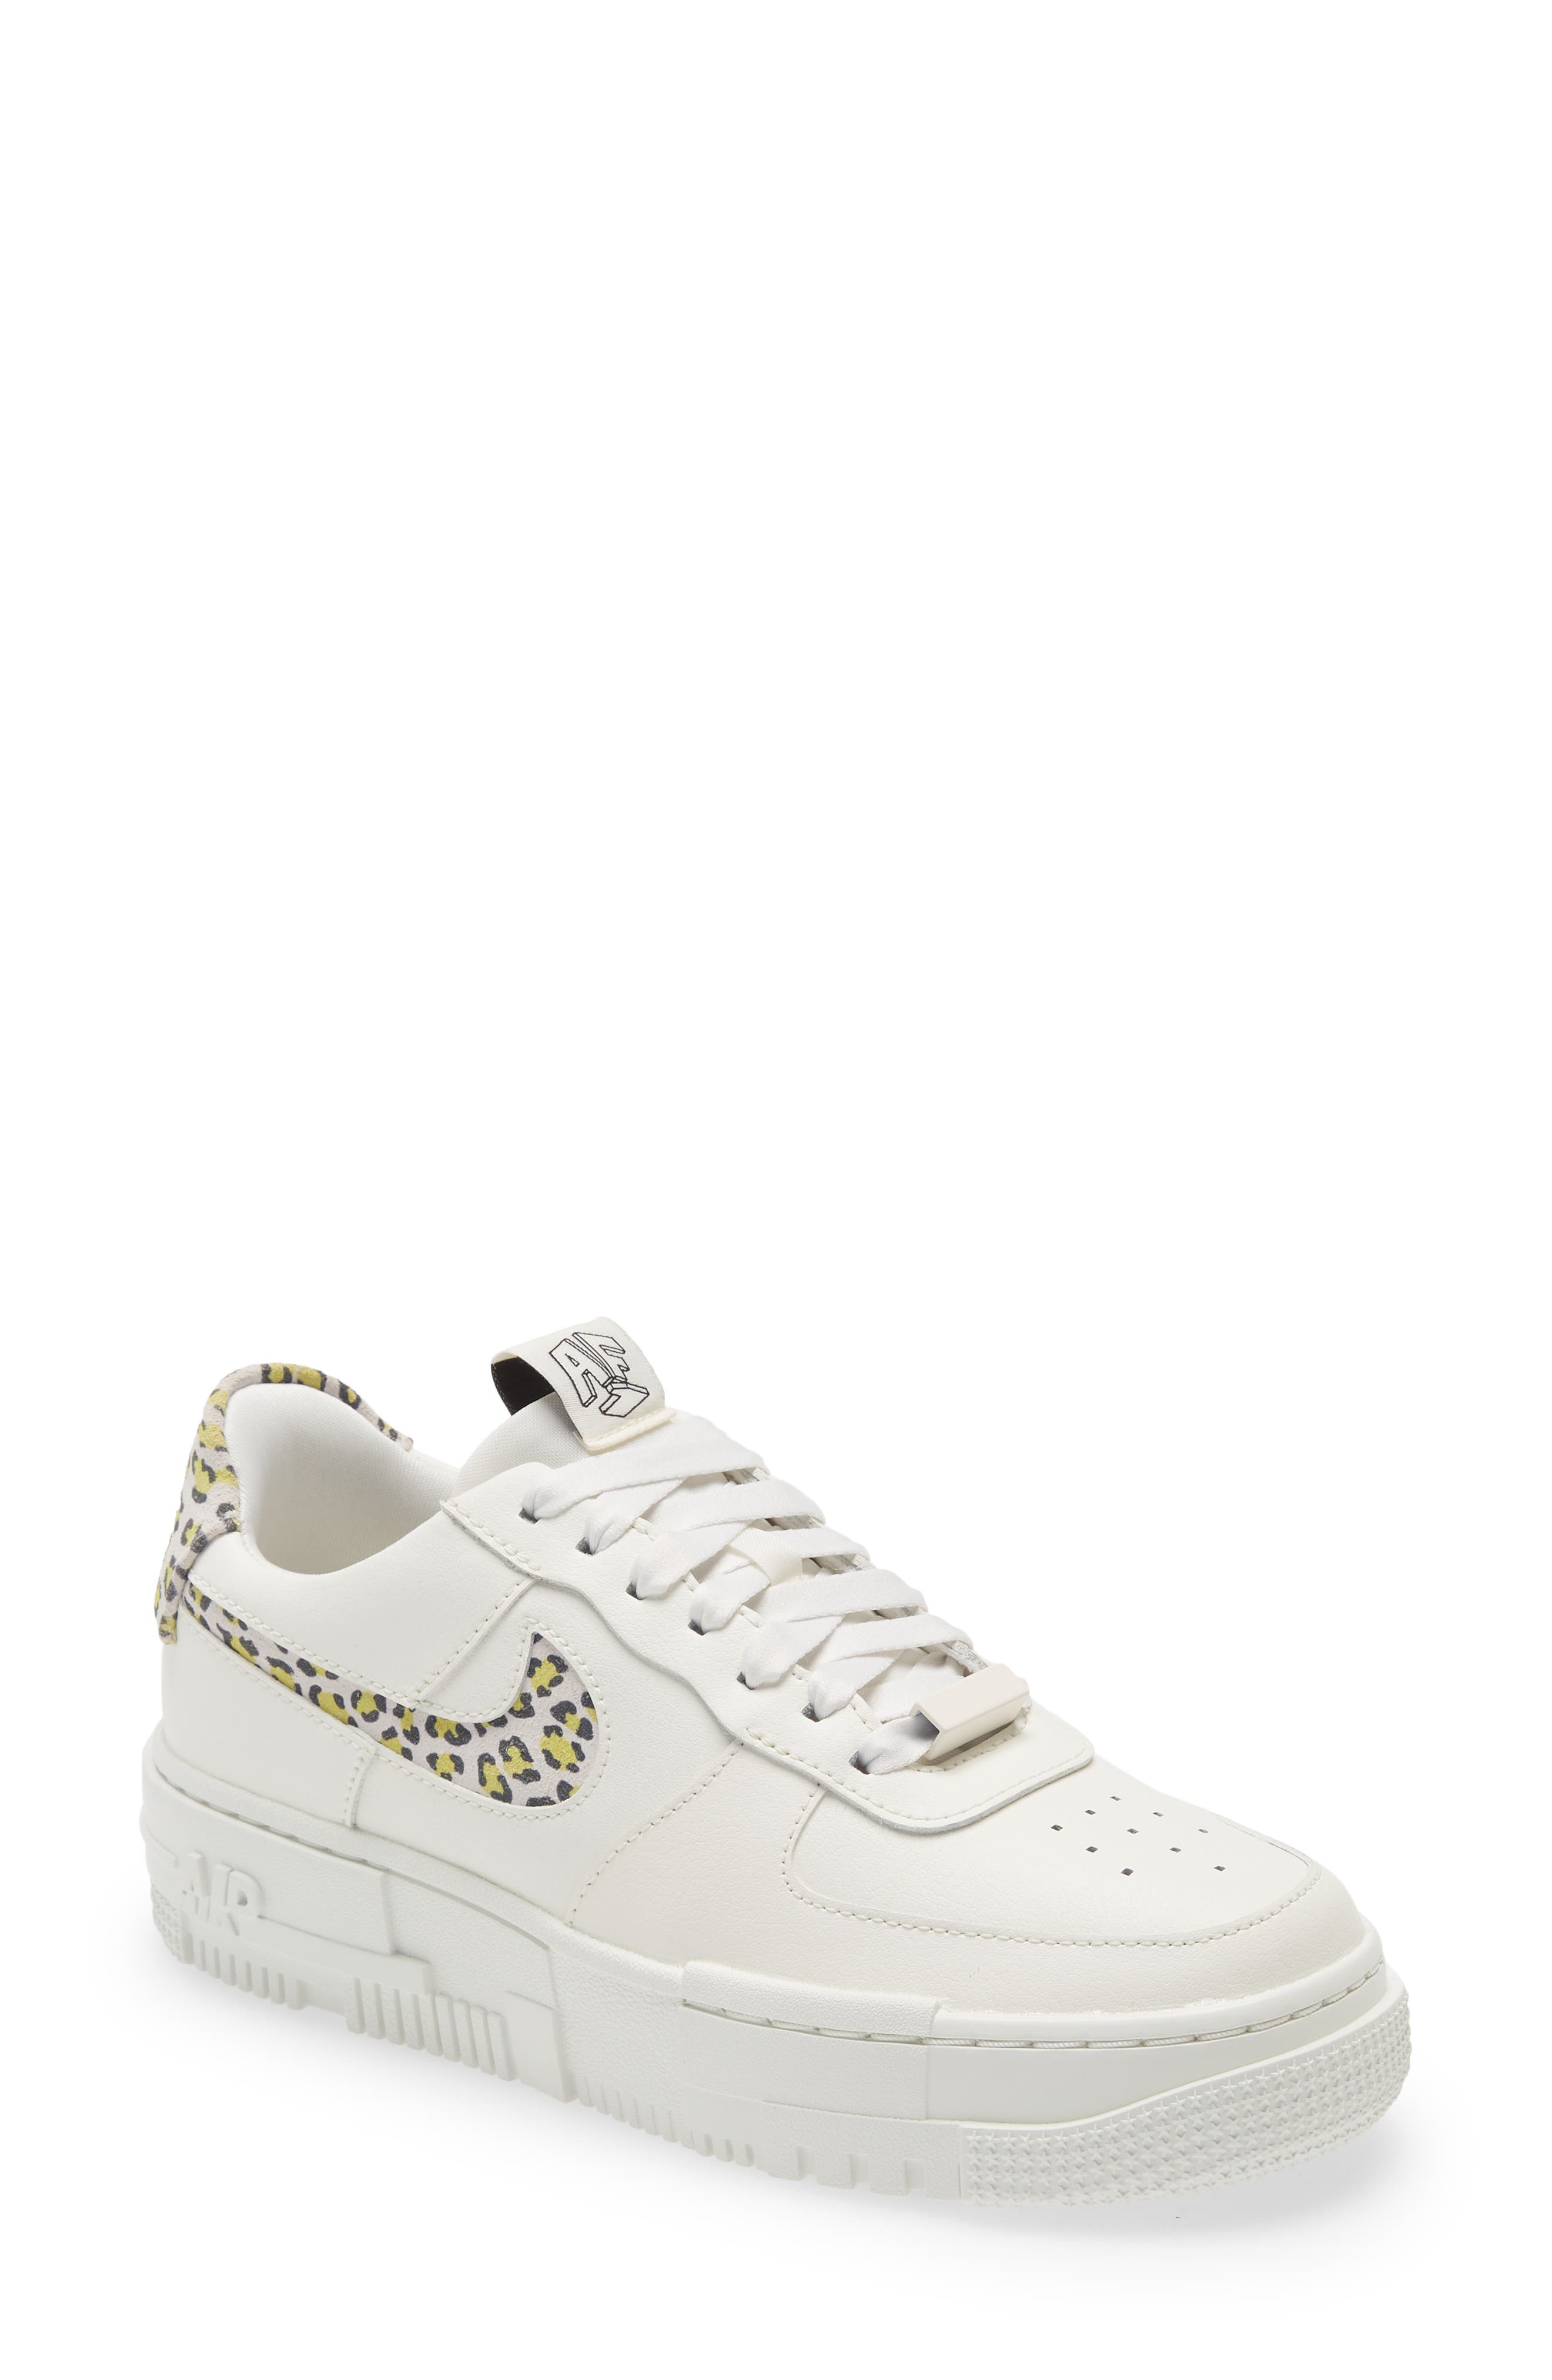 nike air force 1 womens nordstrom